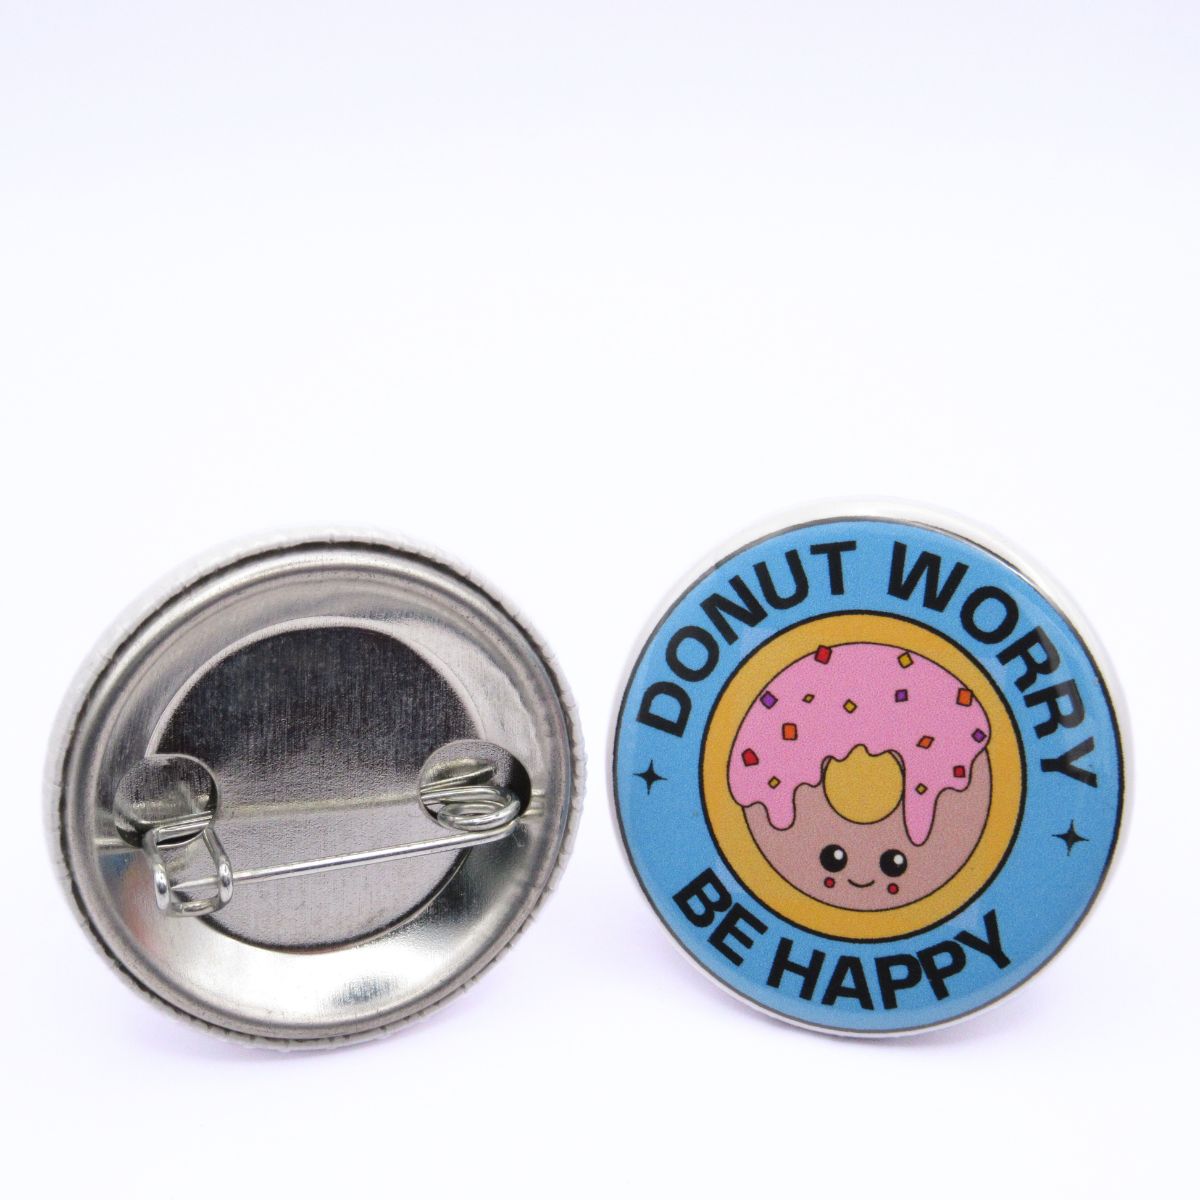 BooBooRoo Pinback Button (i.e. button, badge, pin) of a Cute Kawaii Style donut with the saying "Donut Worry, Be Happy." Image showing front and back of high-quality metal button.